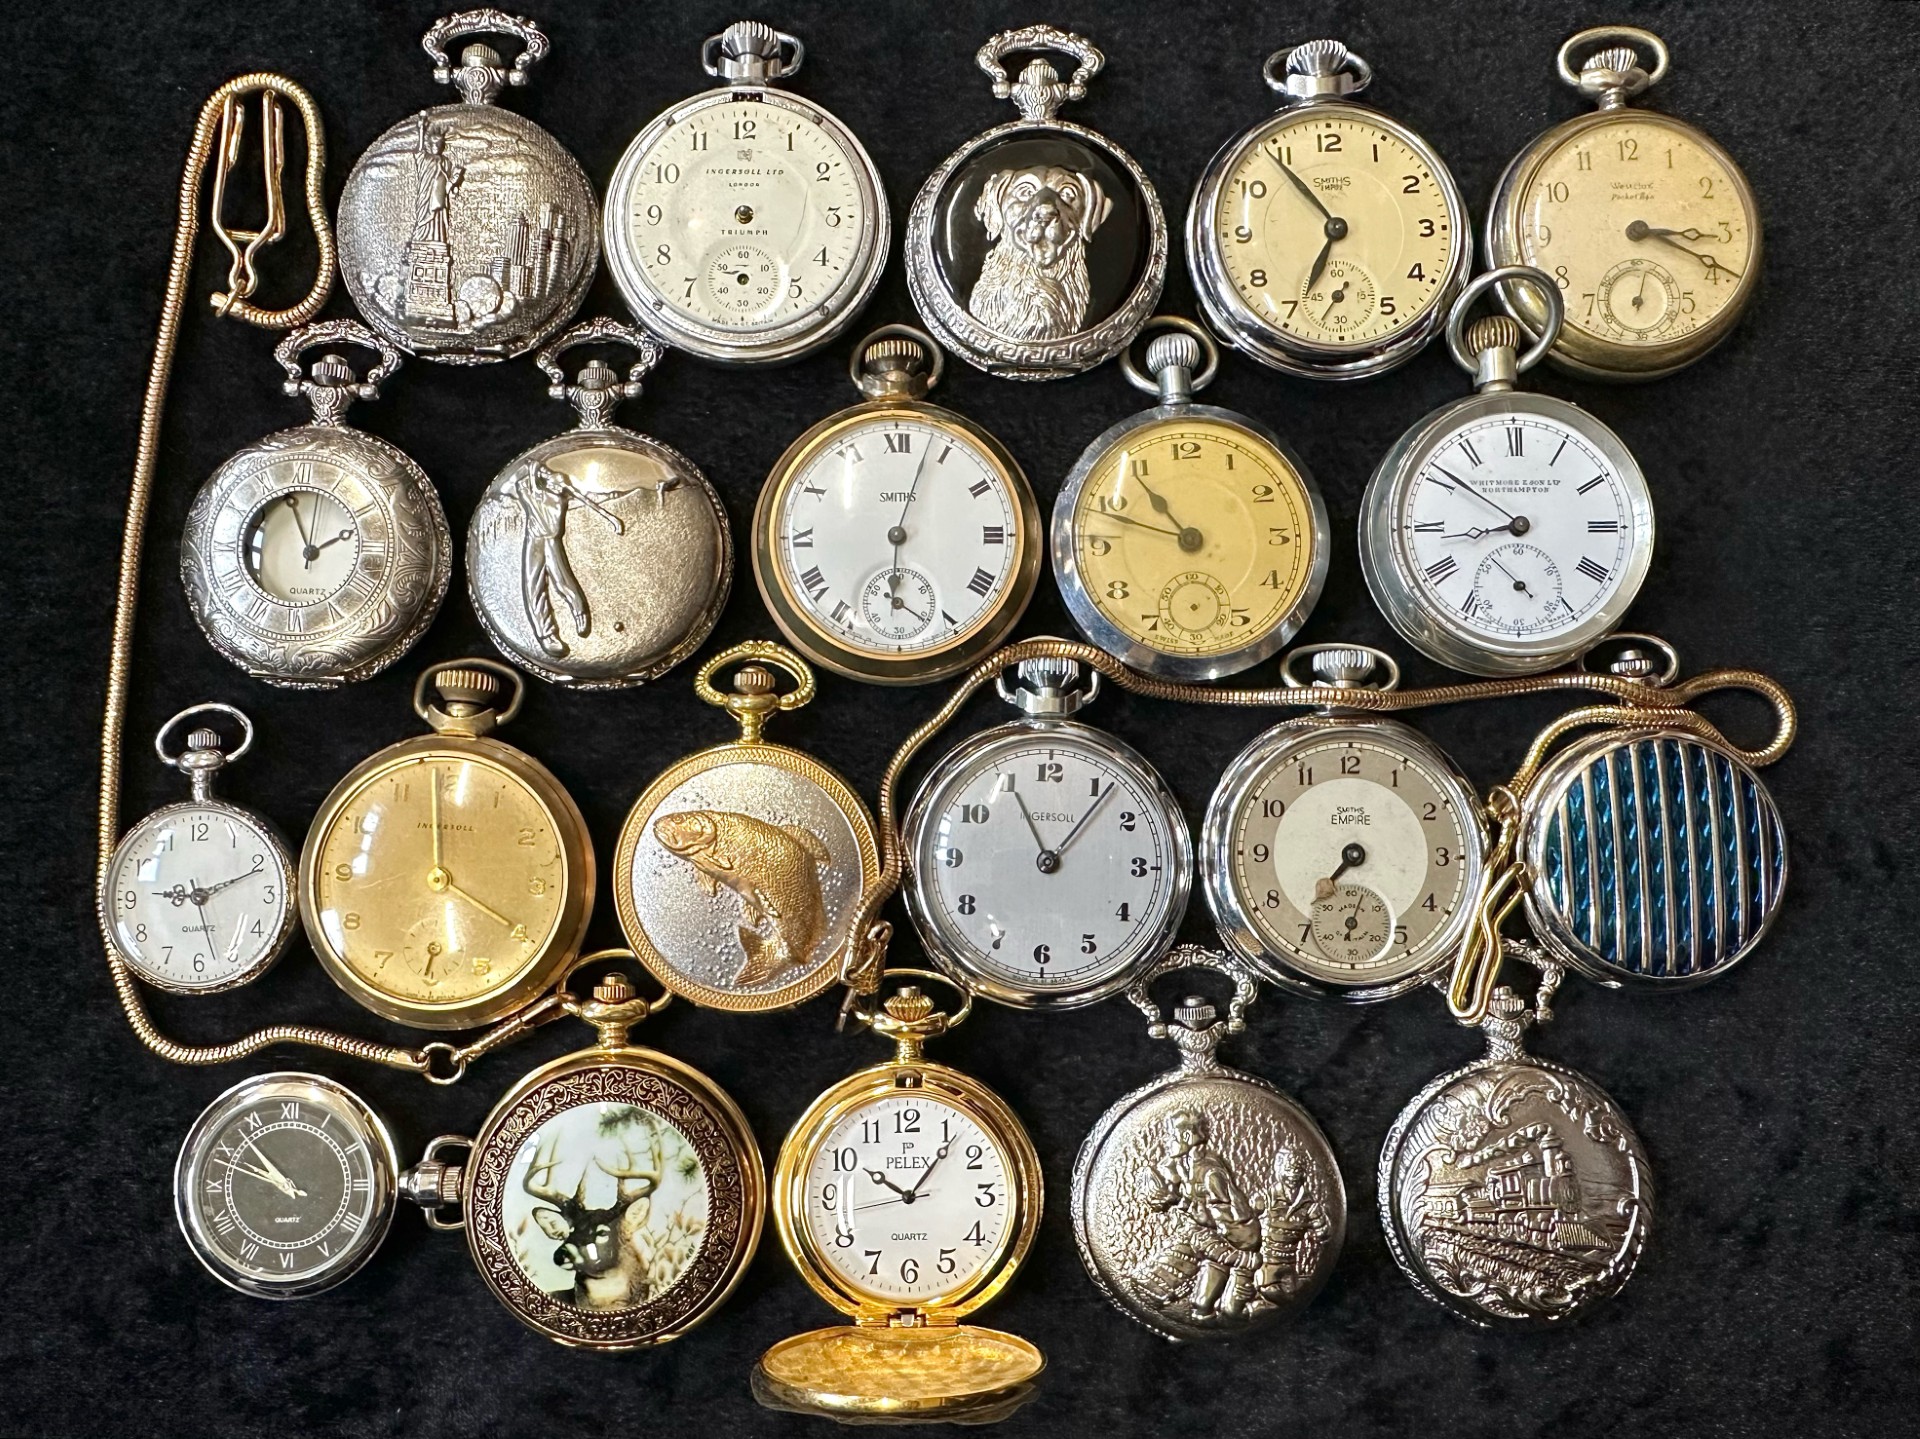 Large Collection of Assorted Pocket Watches, assorted sizes, makes and designs. Makes include